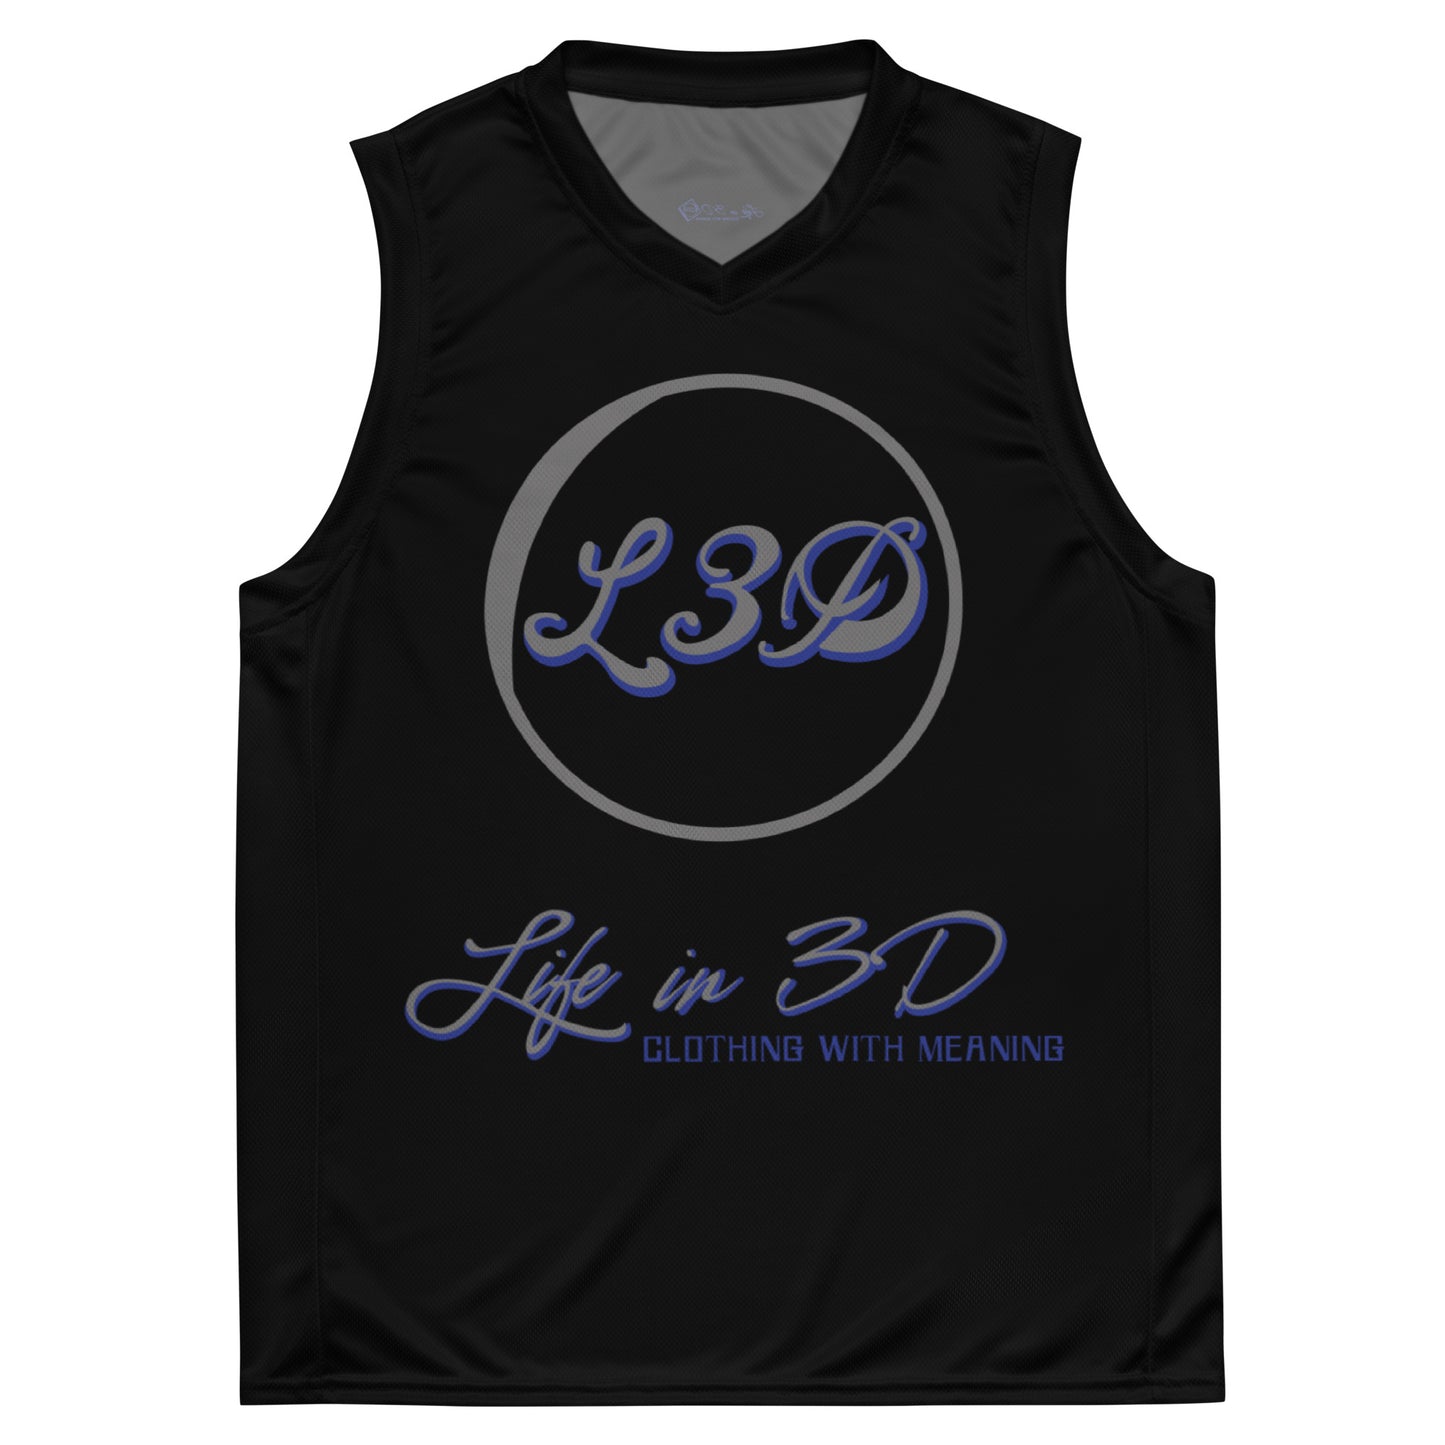 Recycled L3D basketball jersey